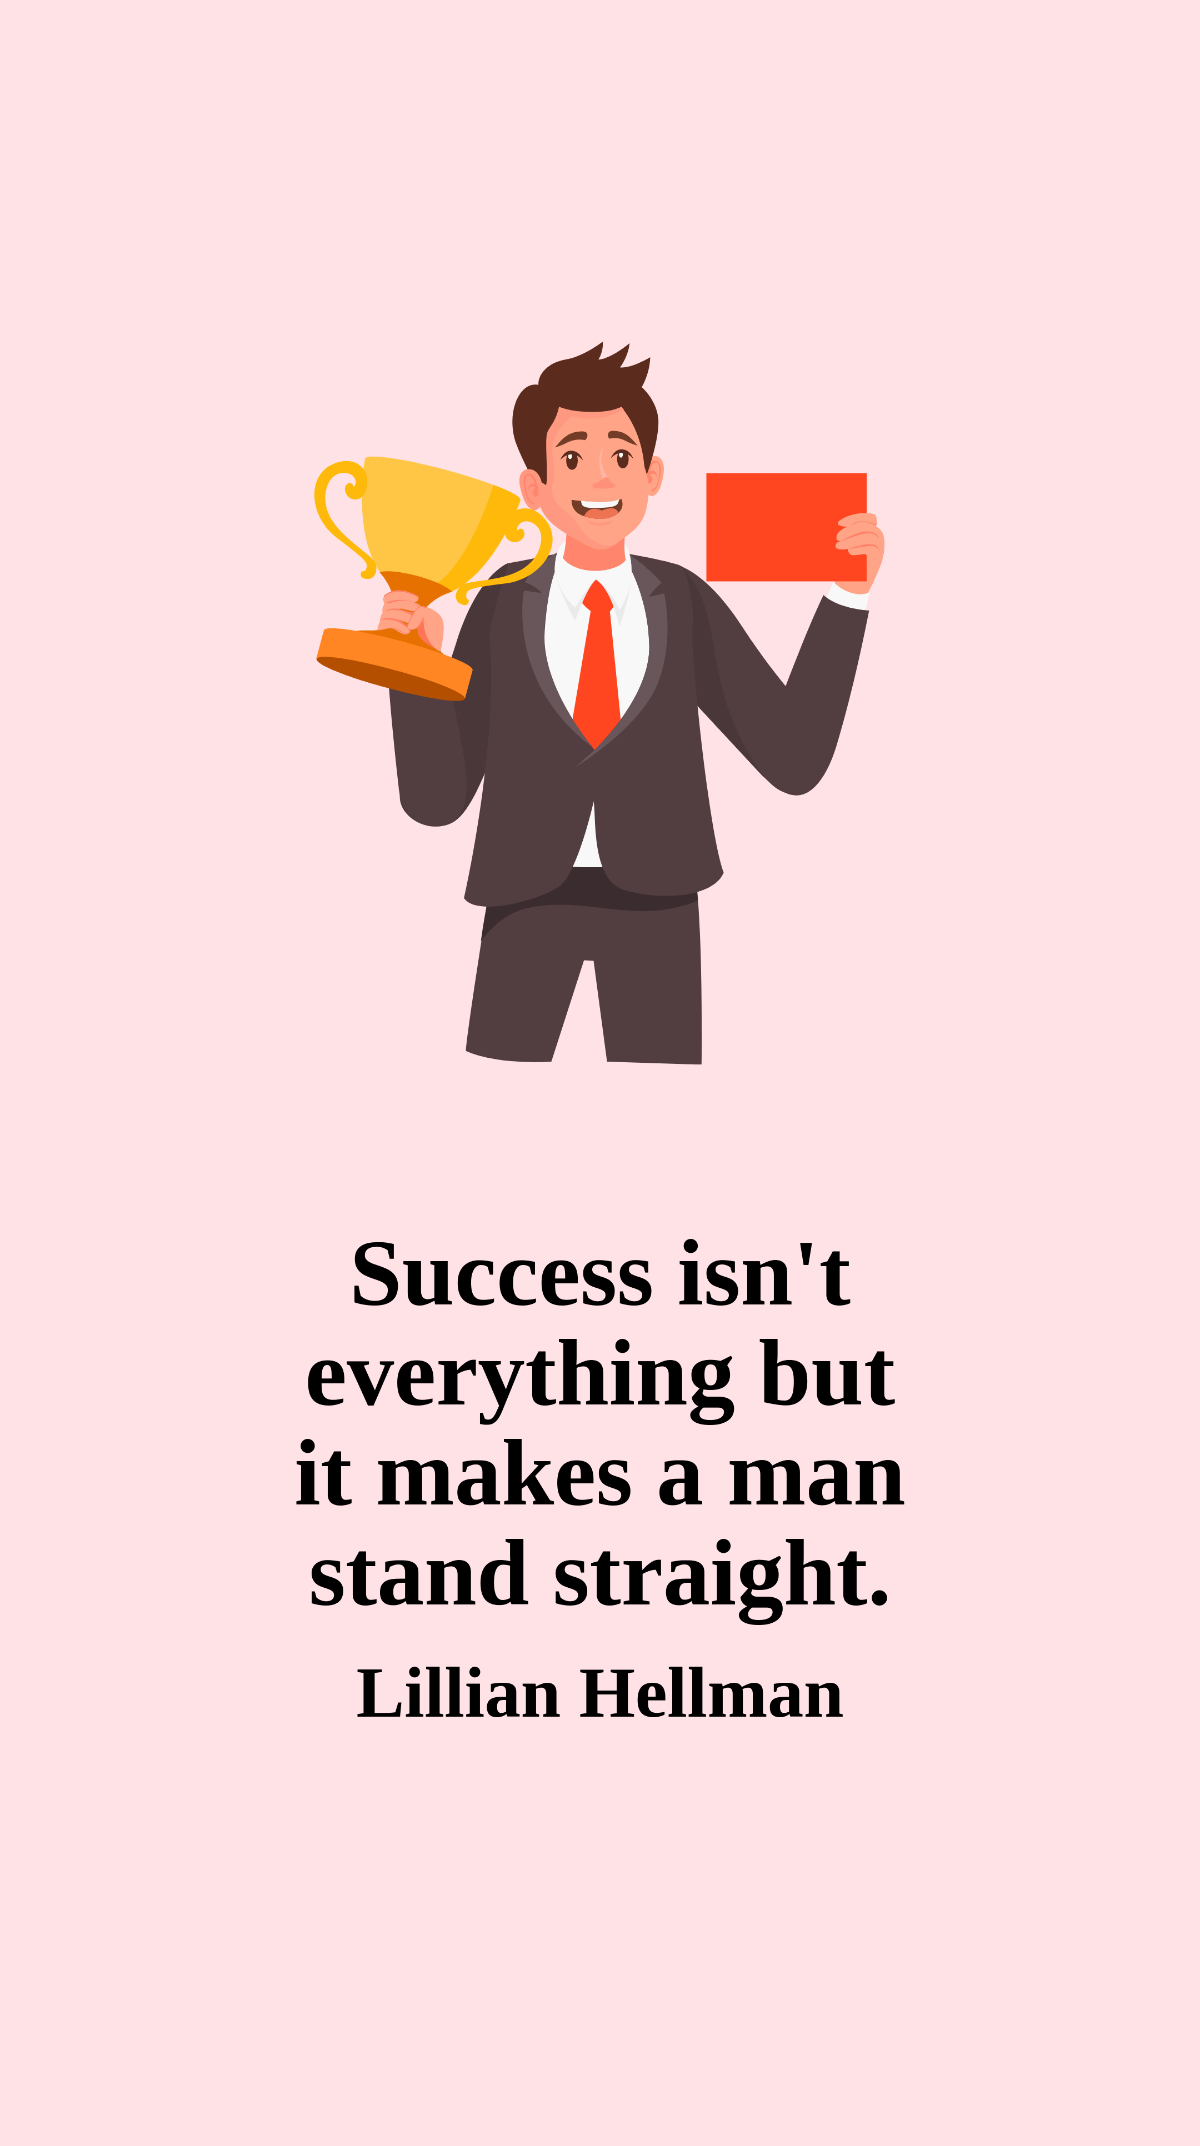 Lillian Hellman - Success isn't everything but it makes a man stand straight. Template